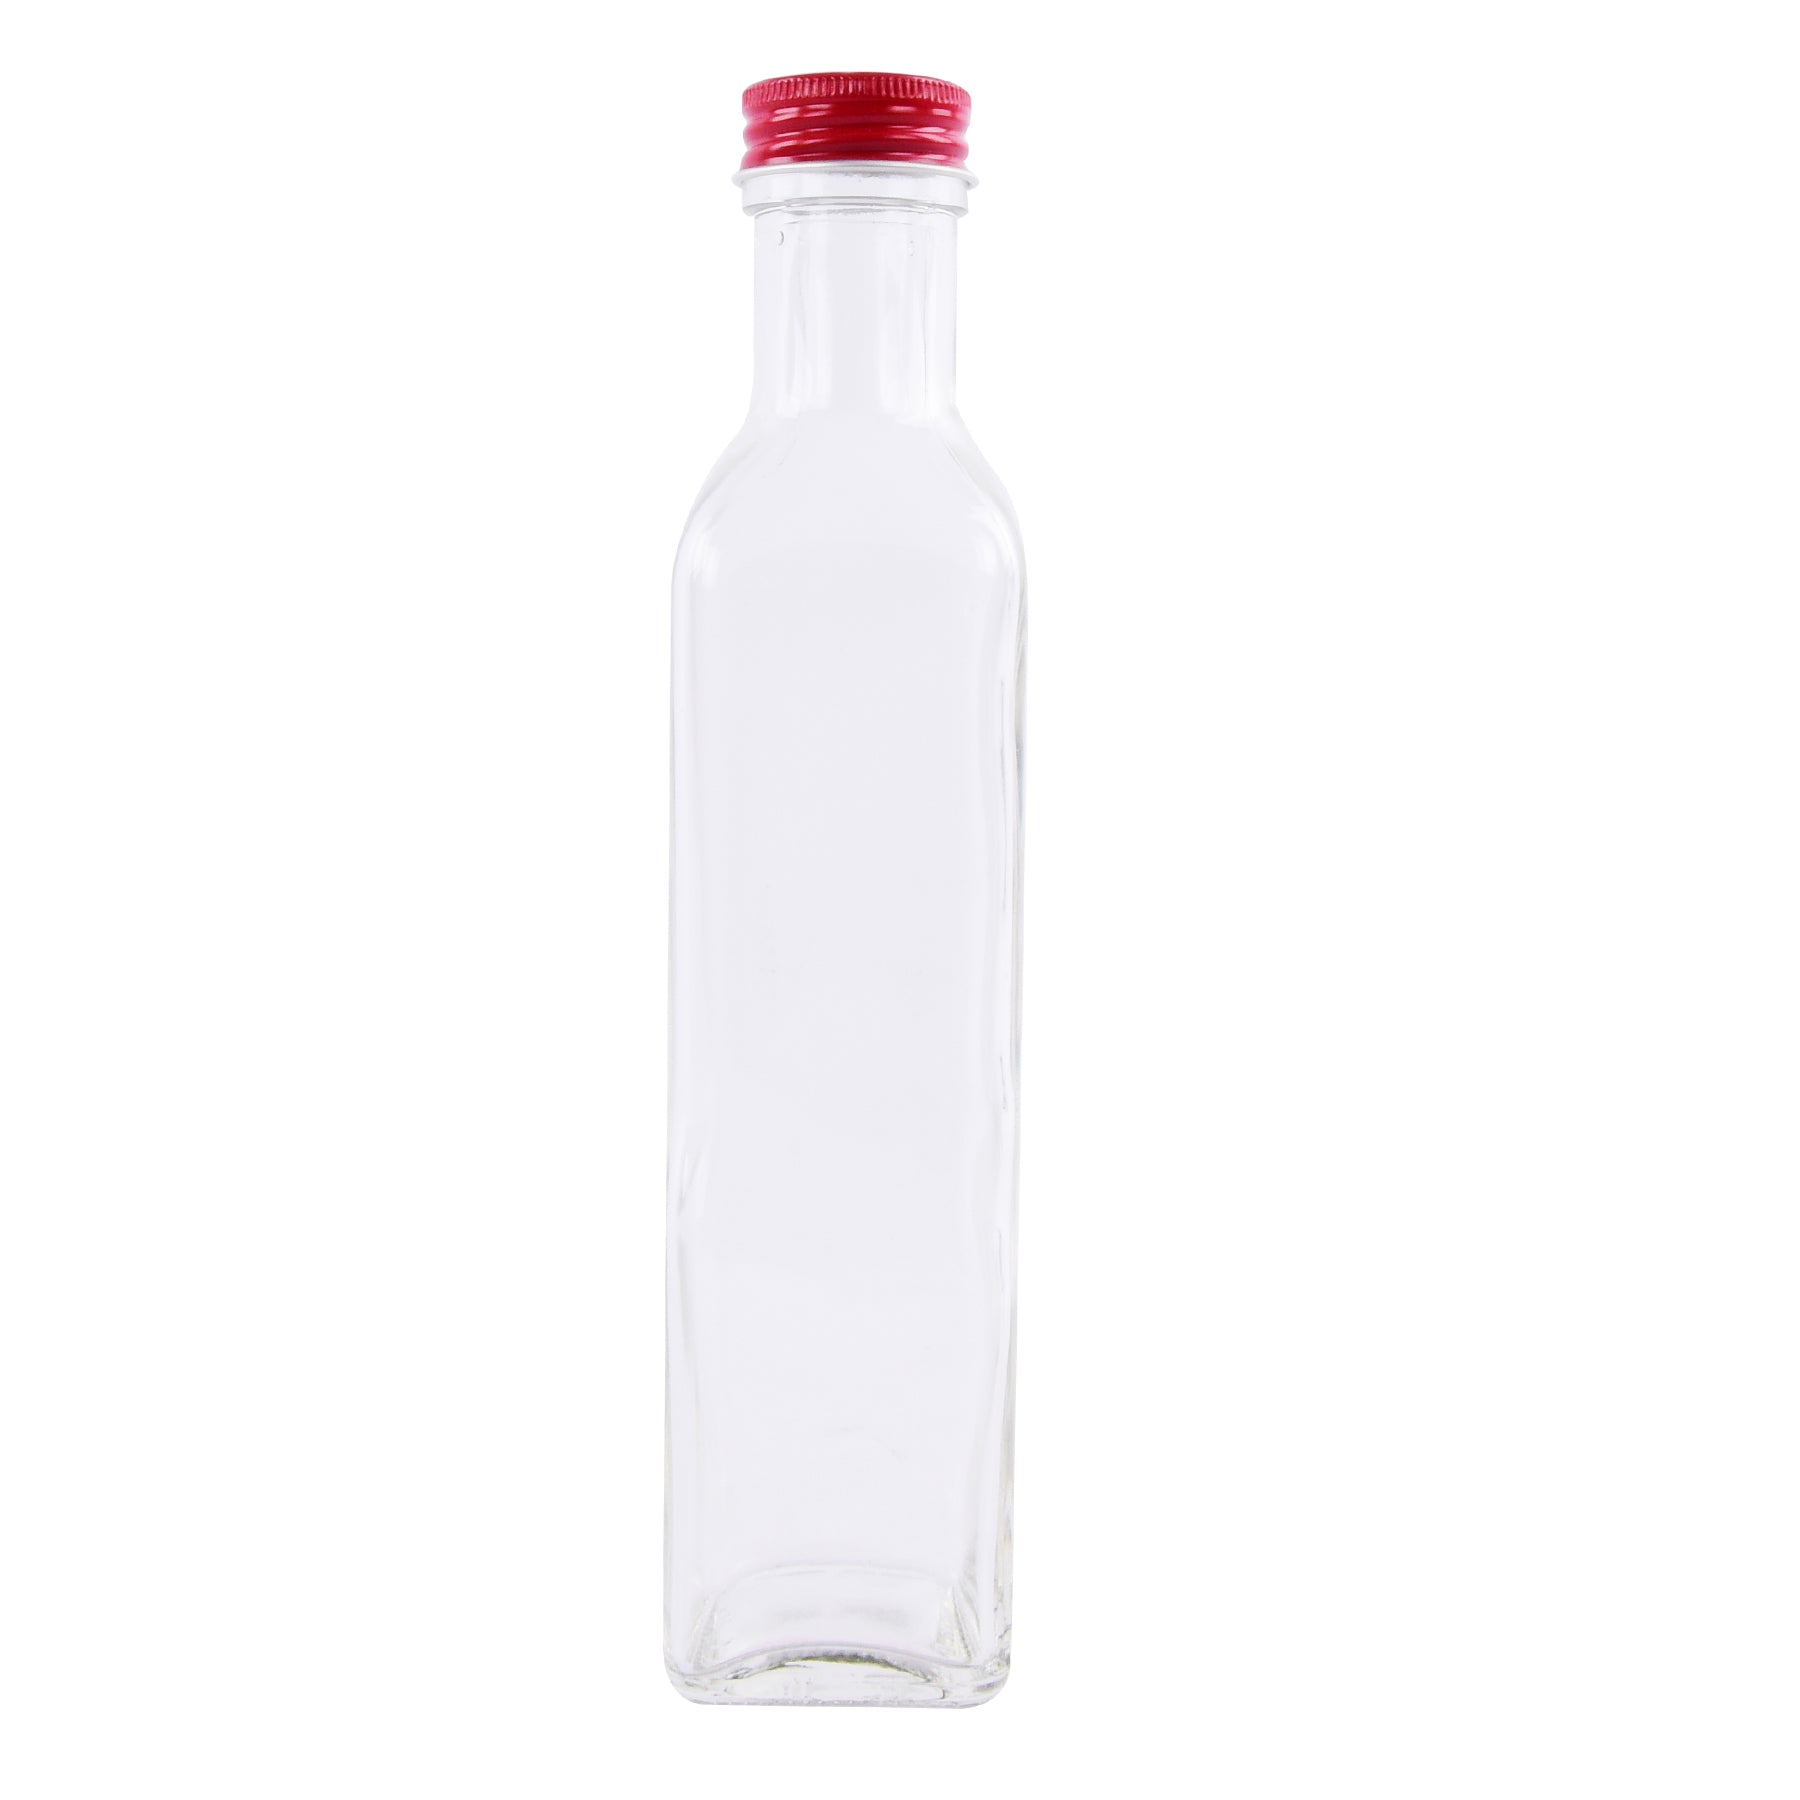 Oil bottle with lid